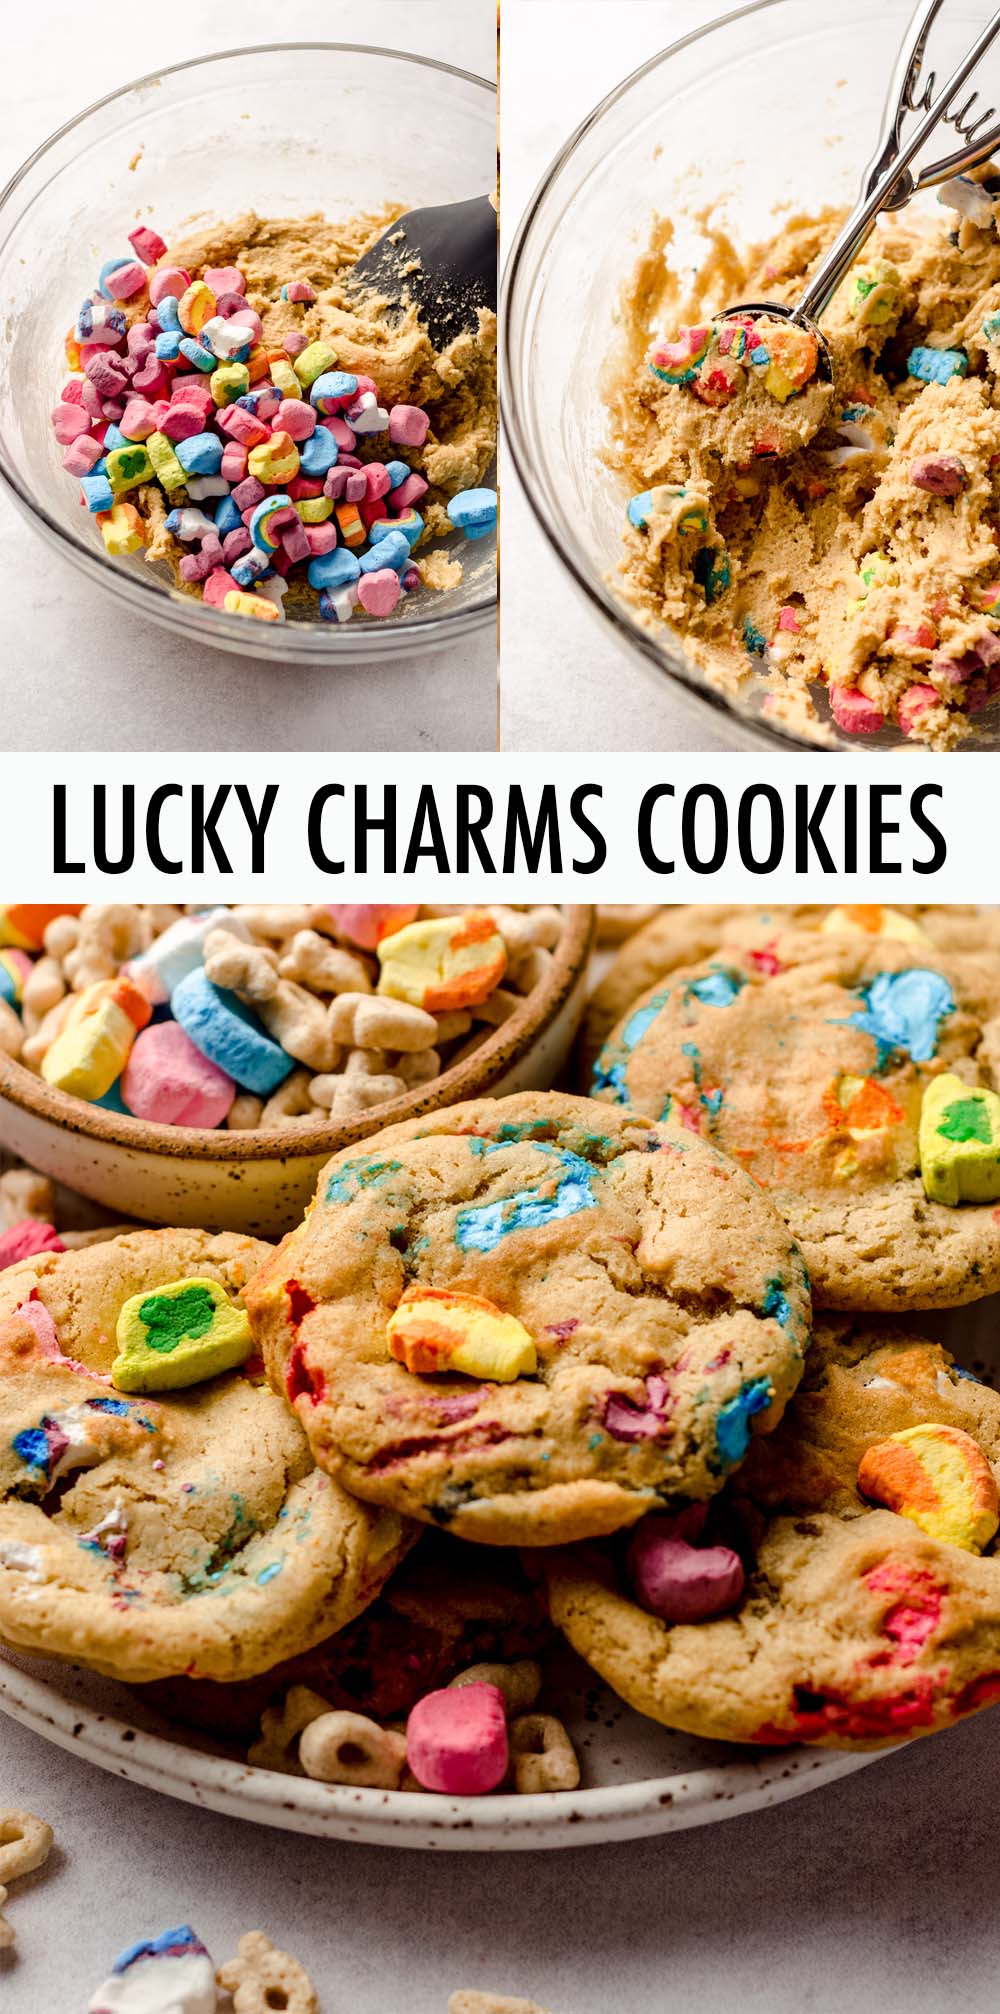 These fun Lucky Charms cookies have slightly crisp edges, light and chewy centers, and are filled to the brim with gooey Lucky Charms marshmallows. Cookies are ready to bake in about 10 minutes and there's no need to chill the dough! via @frshaprilflours